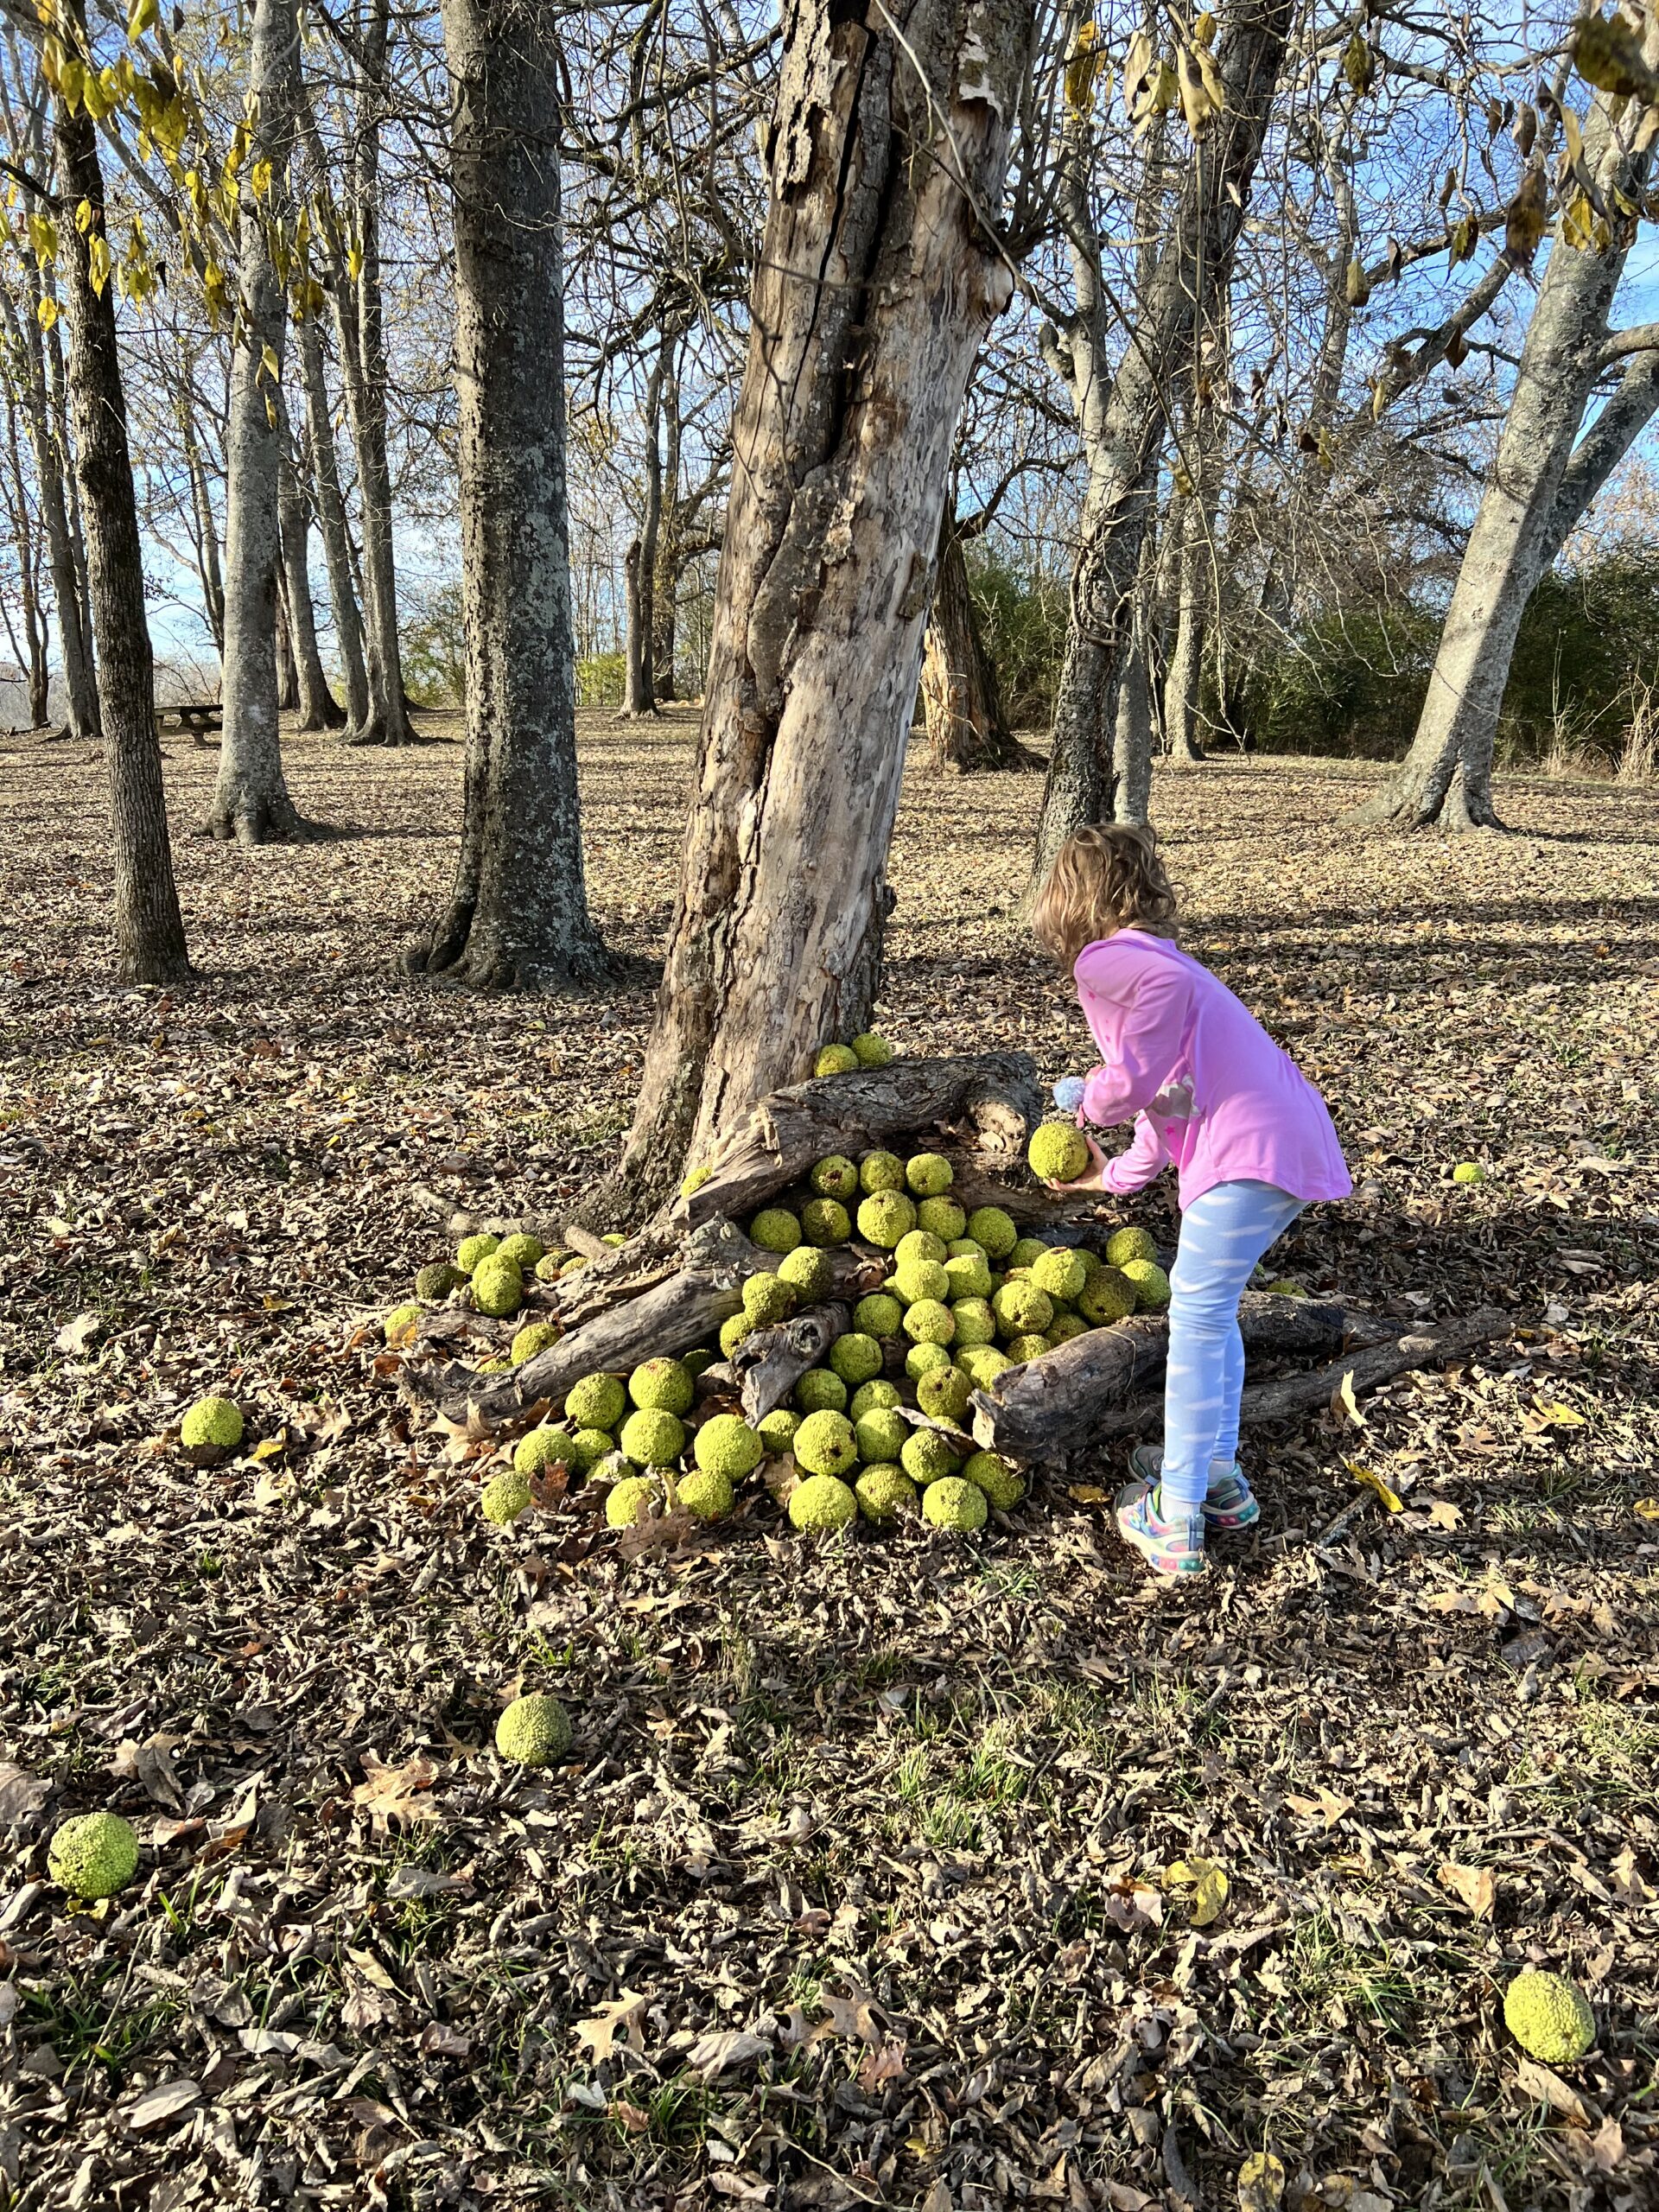 a photo of a child in a forest gathering osage orange pods